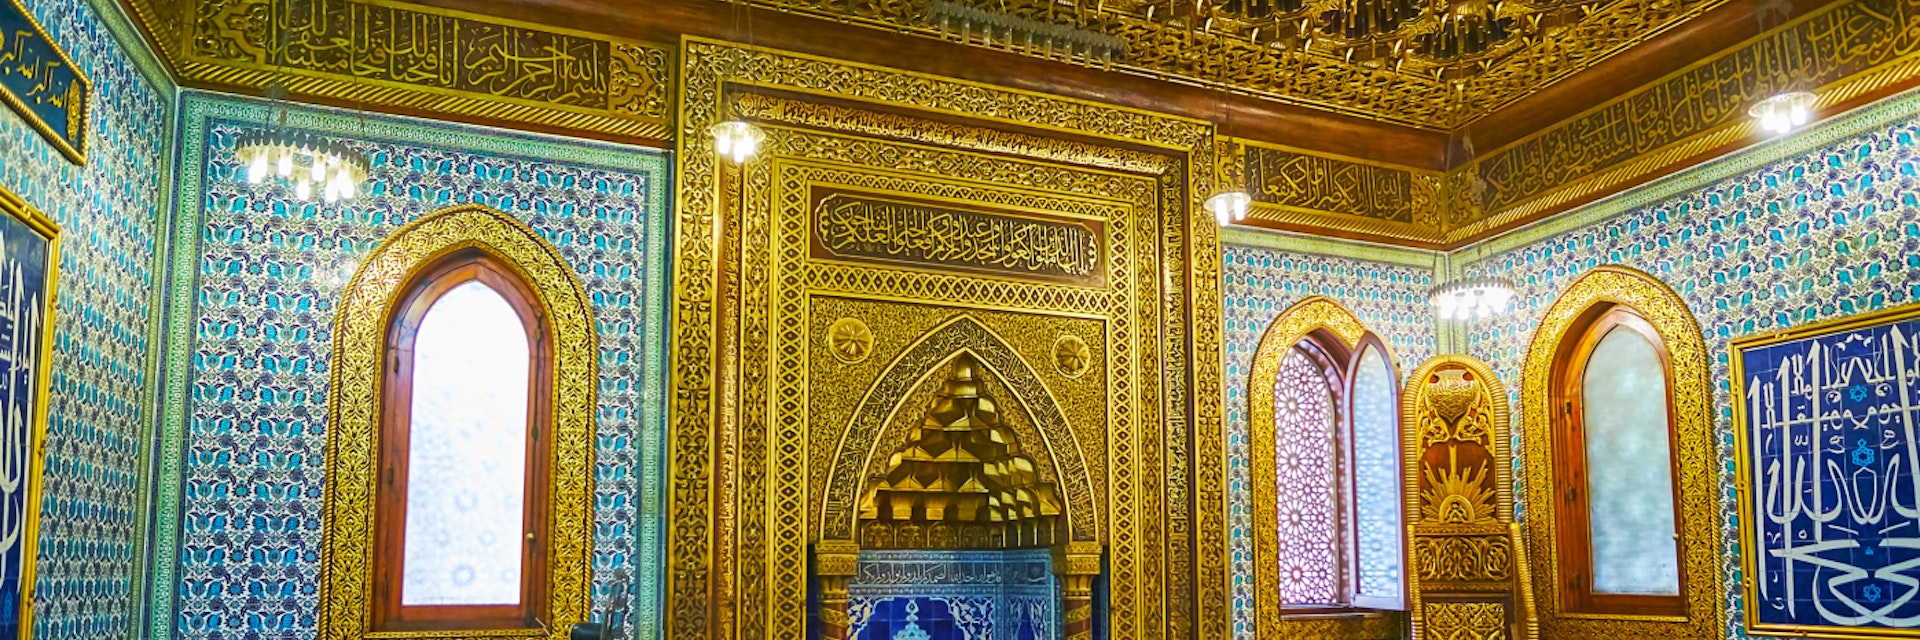 Cairo, Egypt - December 24, 2017:  Mihrab of Manial Palace mosque decorated with intricate golden patterns on carved wood, muqarnas in arch, bright blue tiles inside of niche, on December 24 in Cairo